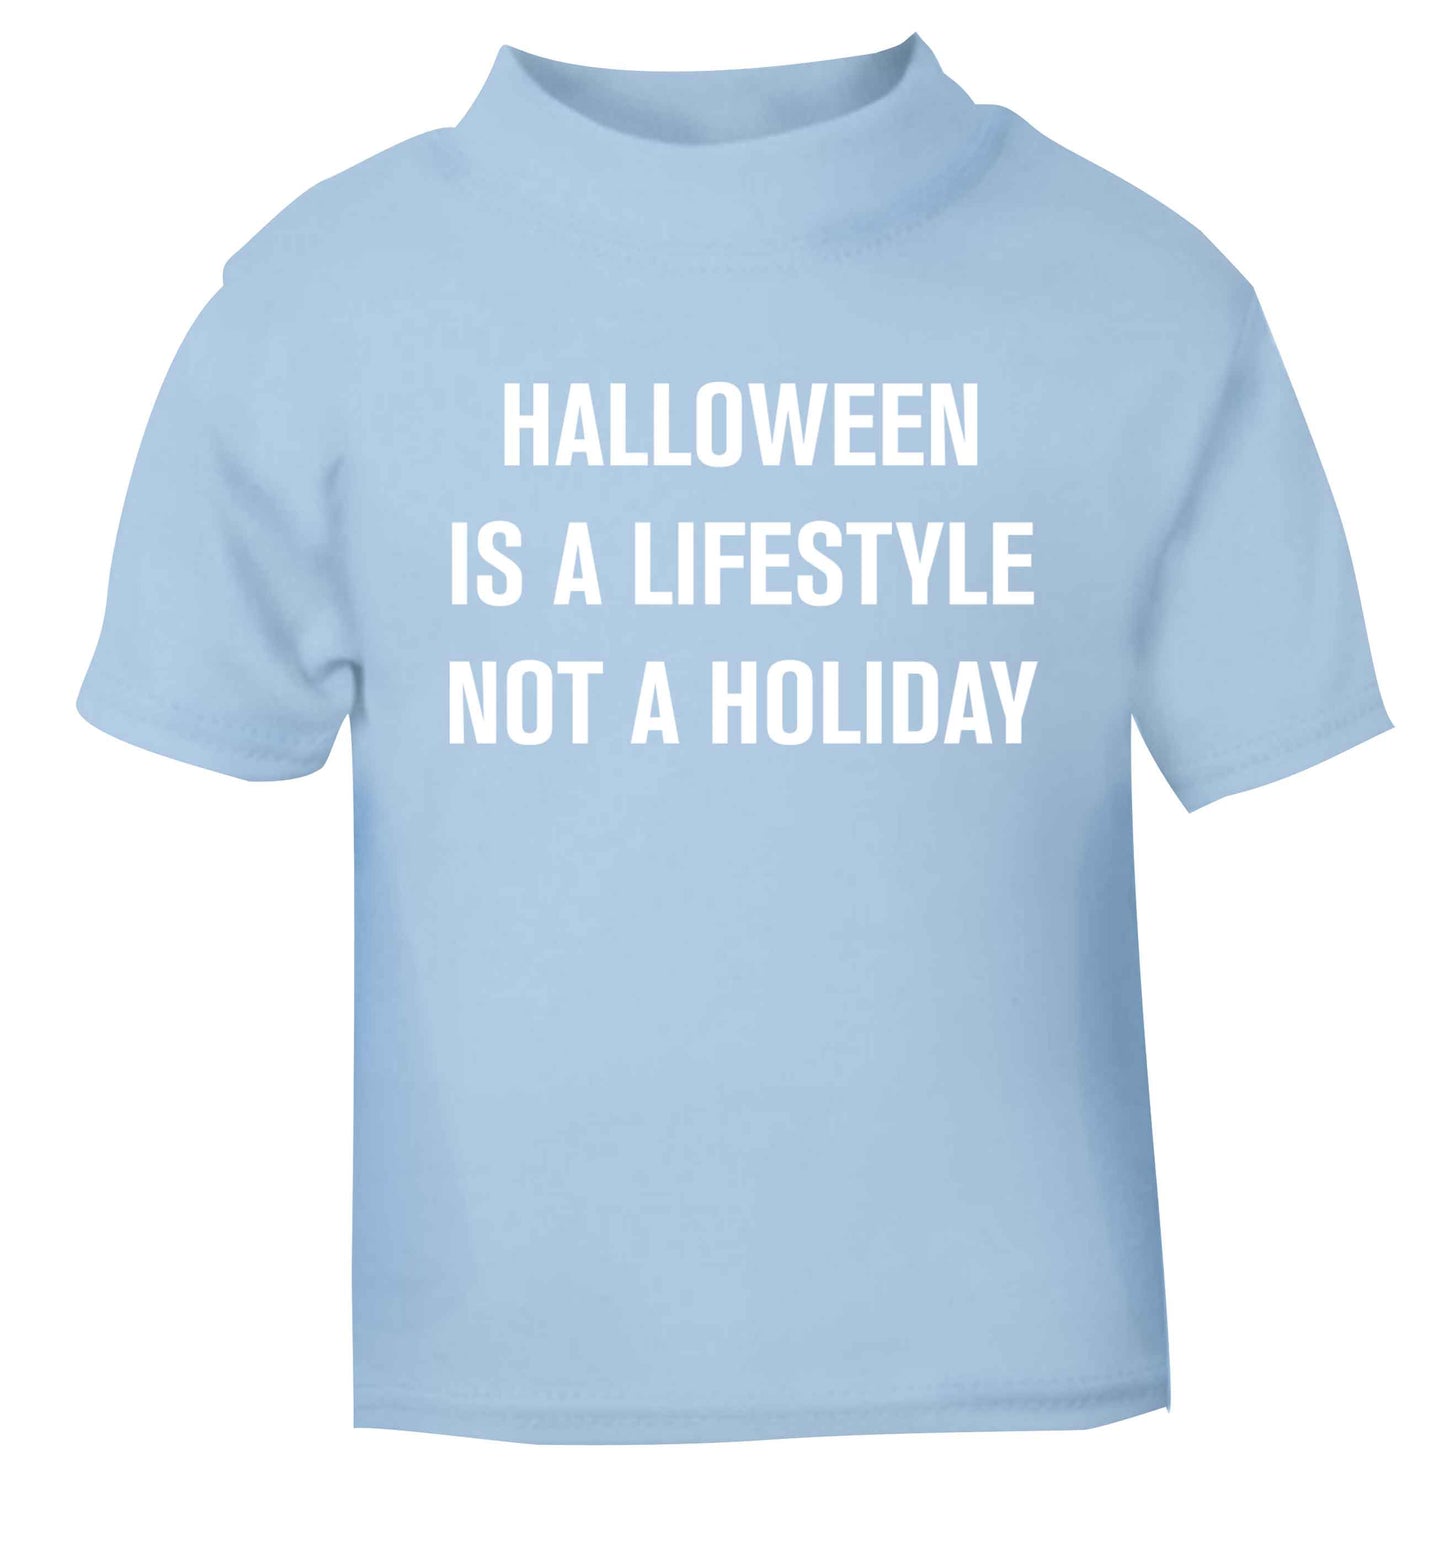 Halloween is a lifestyle not a holiday light blue baby toddler Tshirt 2 Years